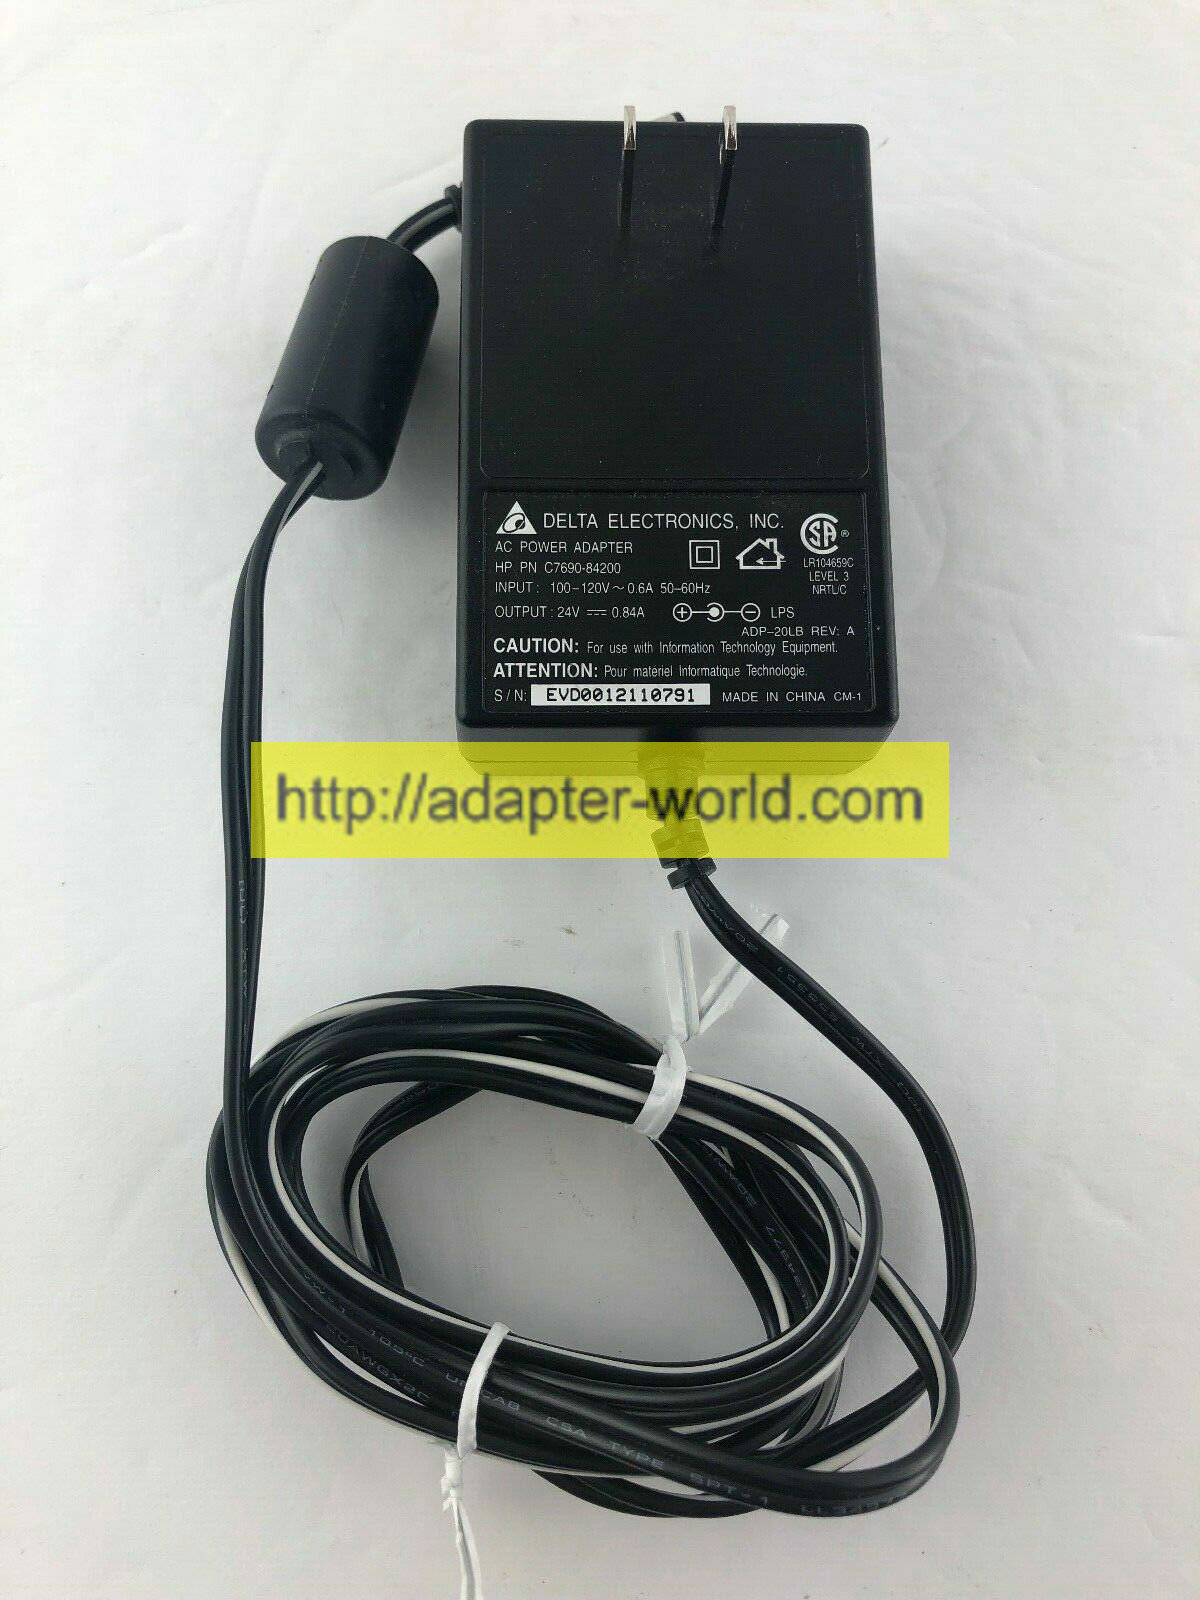 *100% Brand NEW* DC 24V 0.84A AC Adapter for Delta Electronics ADP-20LB Power Supply Free shipping!